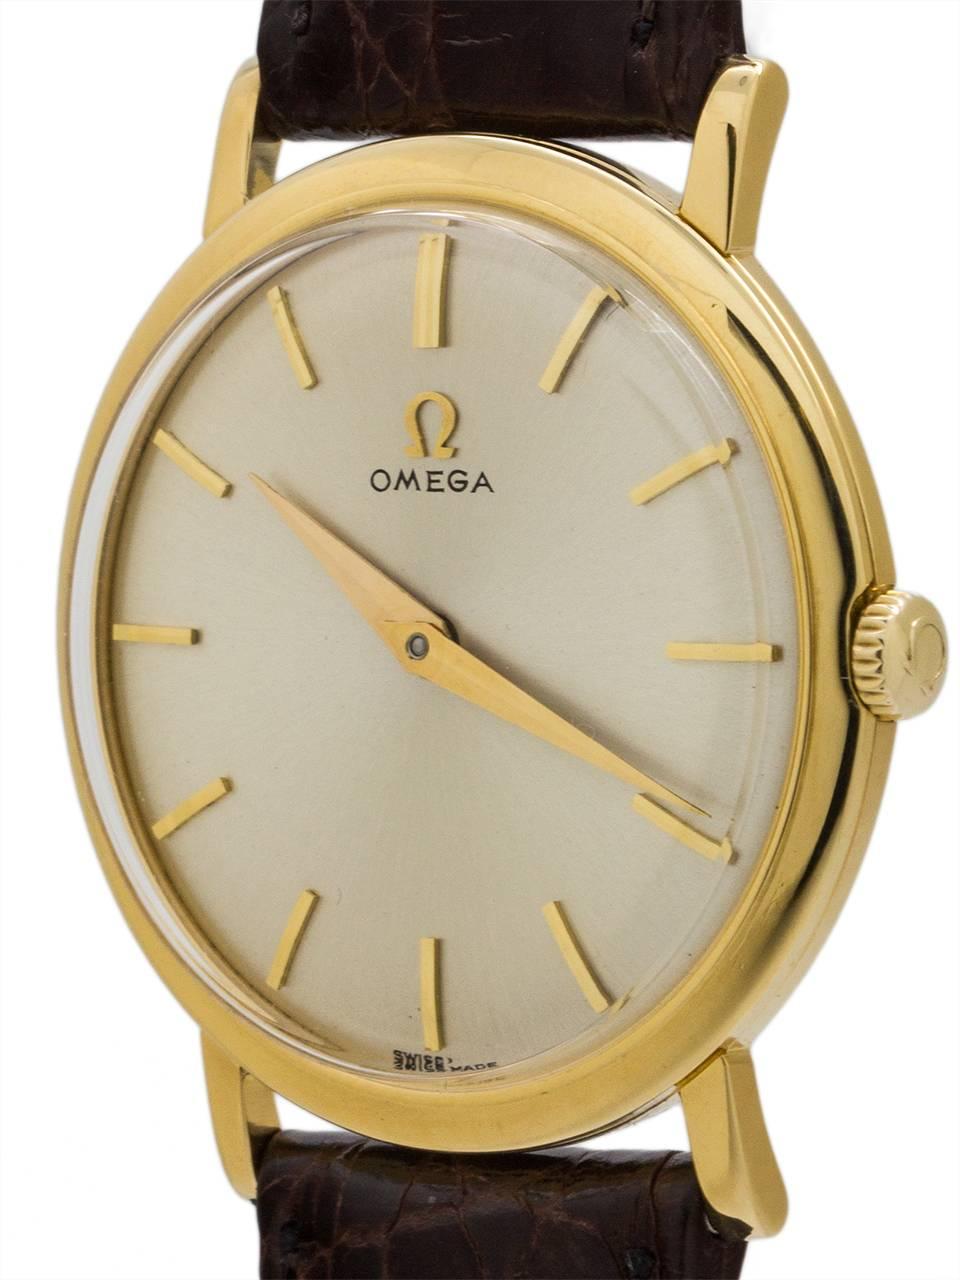 
Vintage man’s Omega 18K yellow gold dress model with thin, straight lugs, circa 1958. The thin dress case is 32mm in diameter, and features a signed gold Omega crown and acrylic crystal. With very minty condition original silvered satin dial with